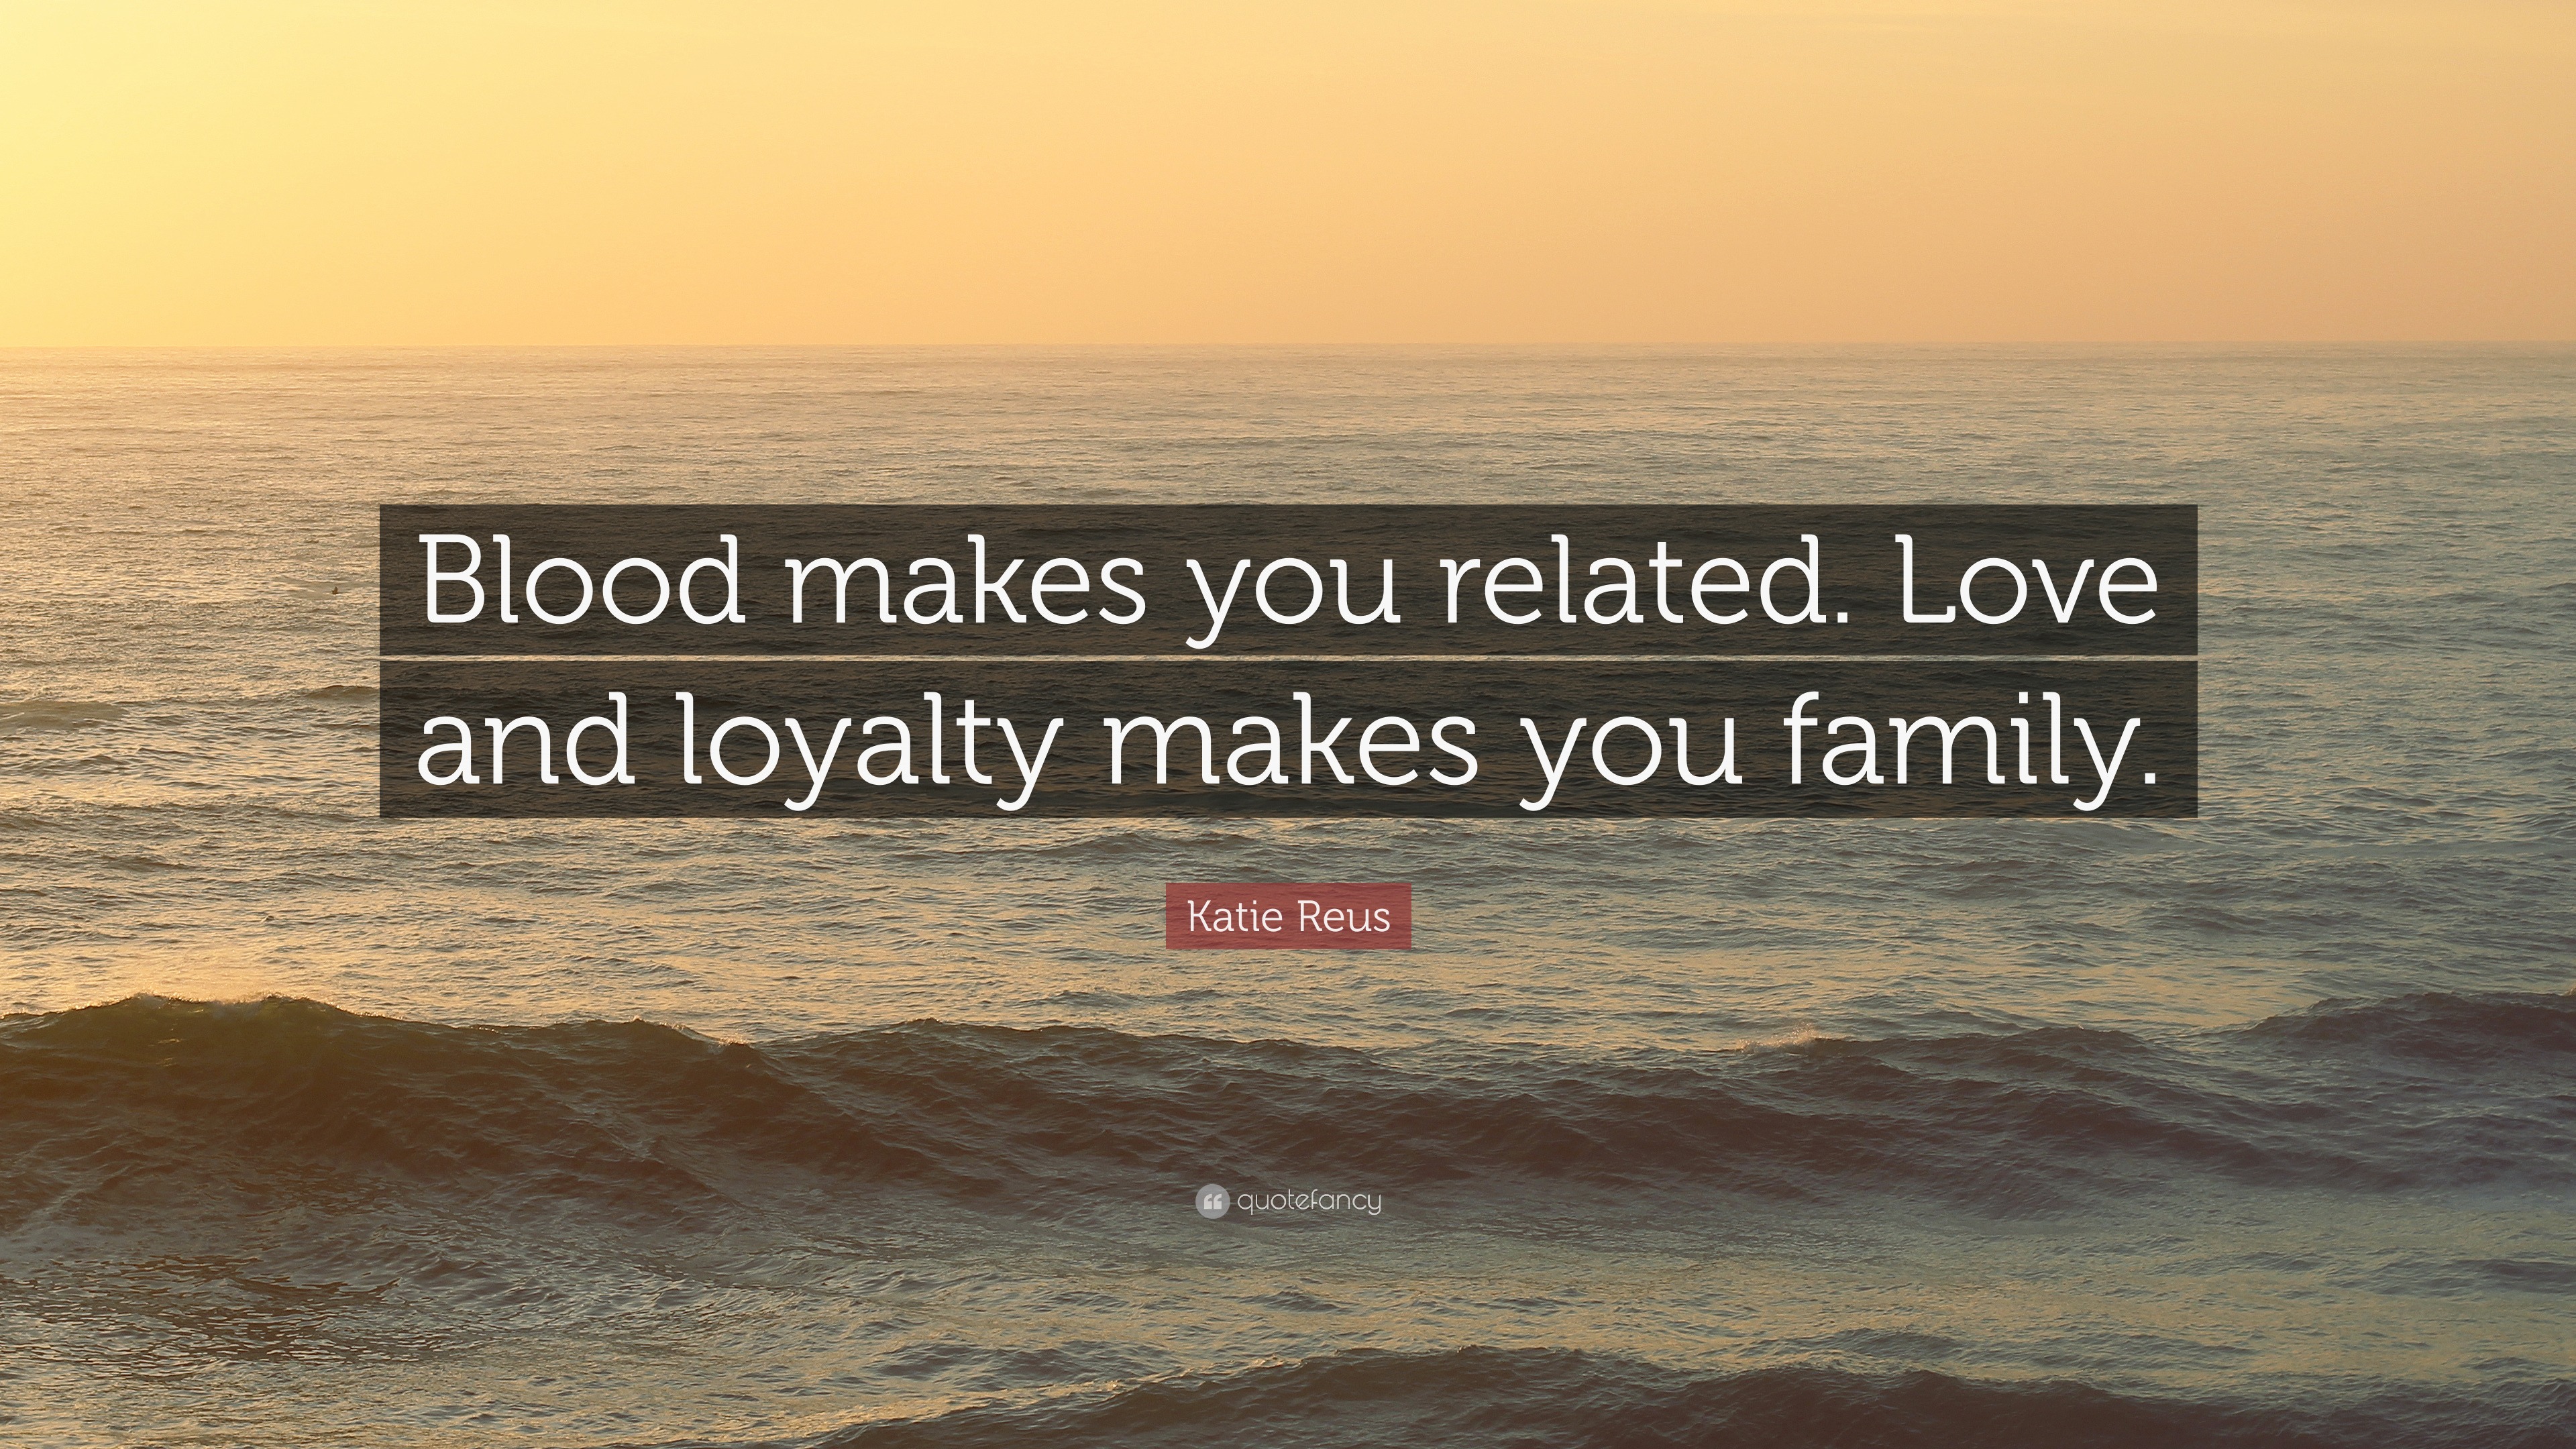 Katie Reus Quote: “Blood makes you related. Love and loyalty makes you  family.”